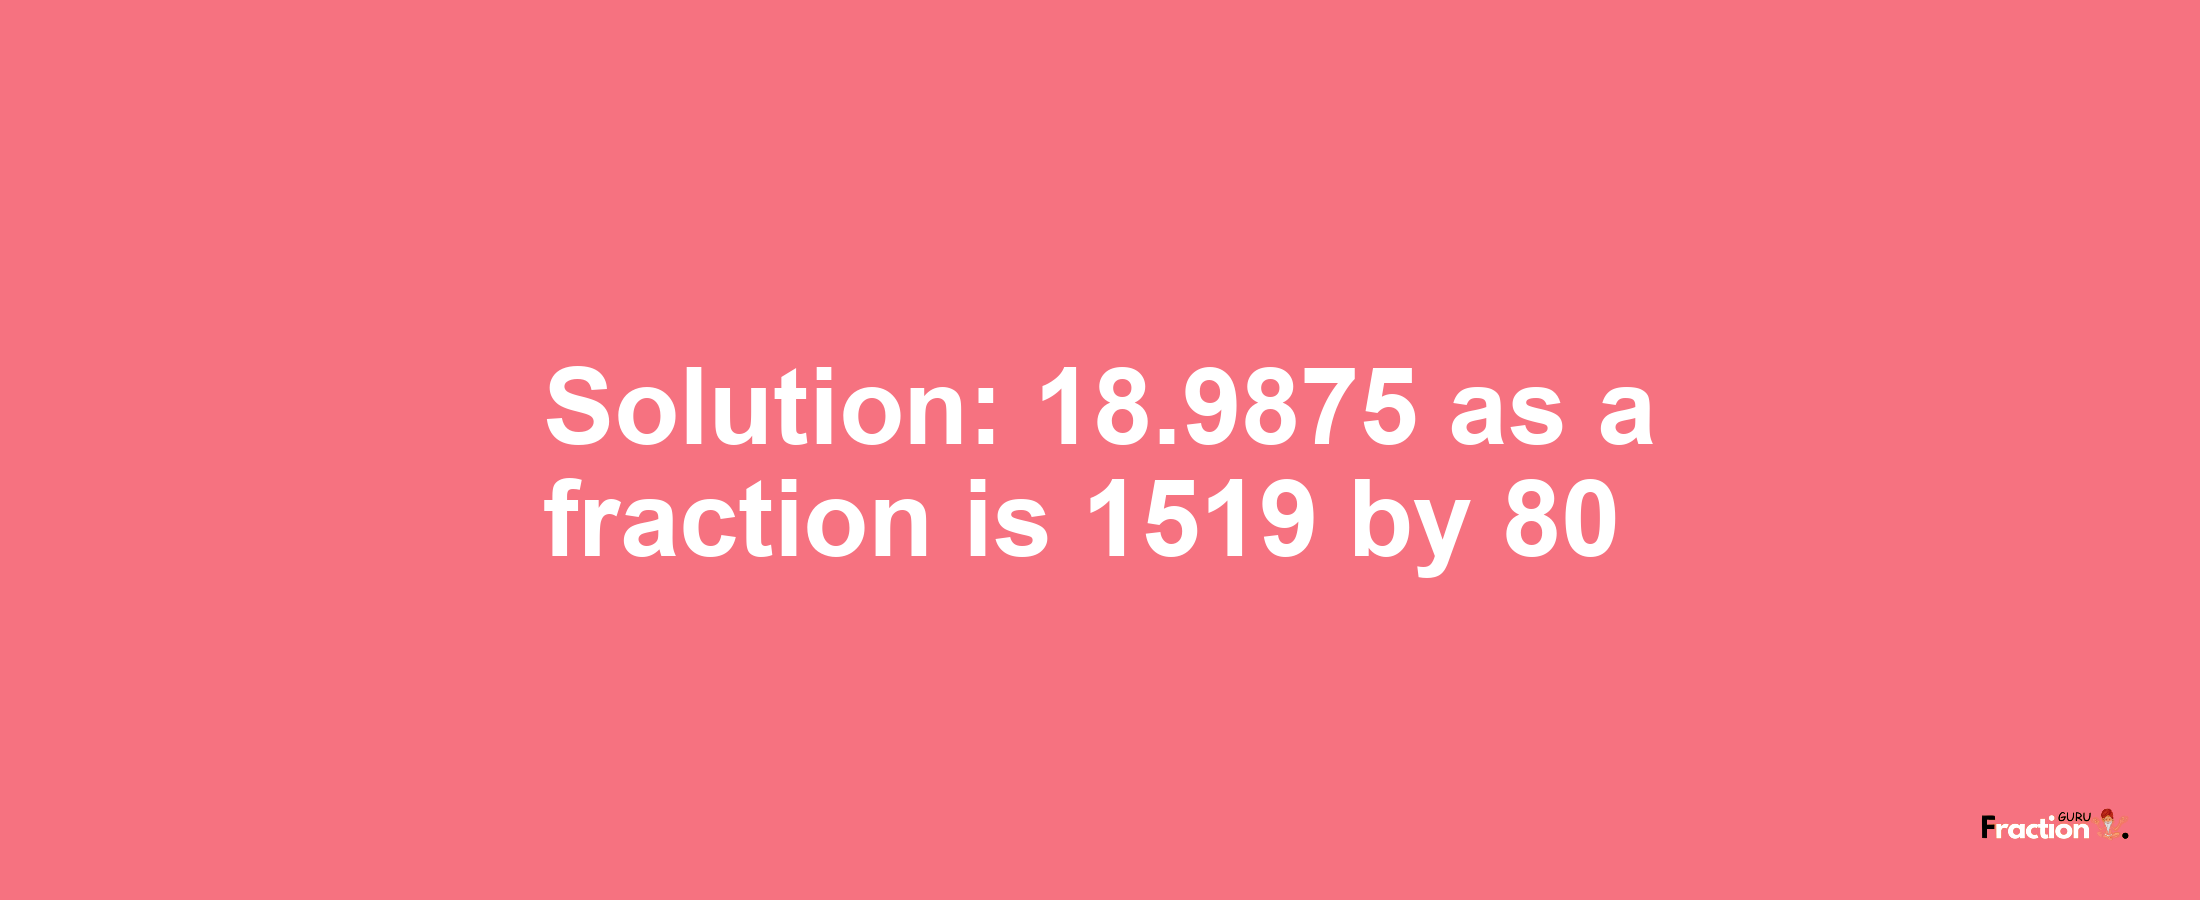 Solution:18.9875 as a fraction is 1519/80